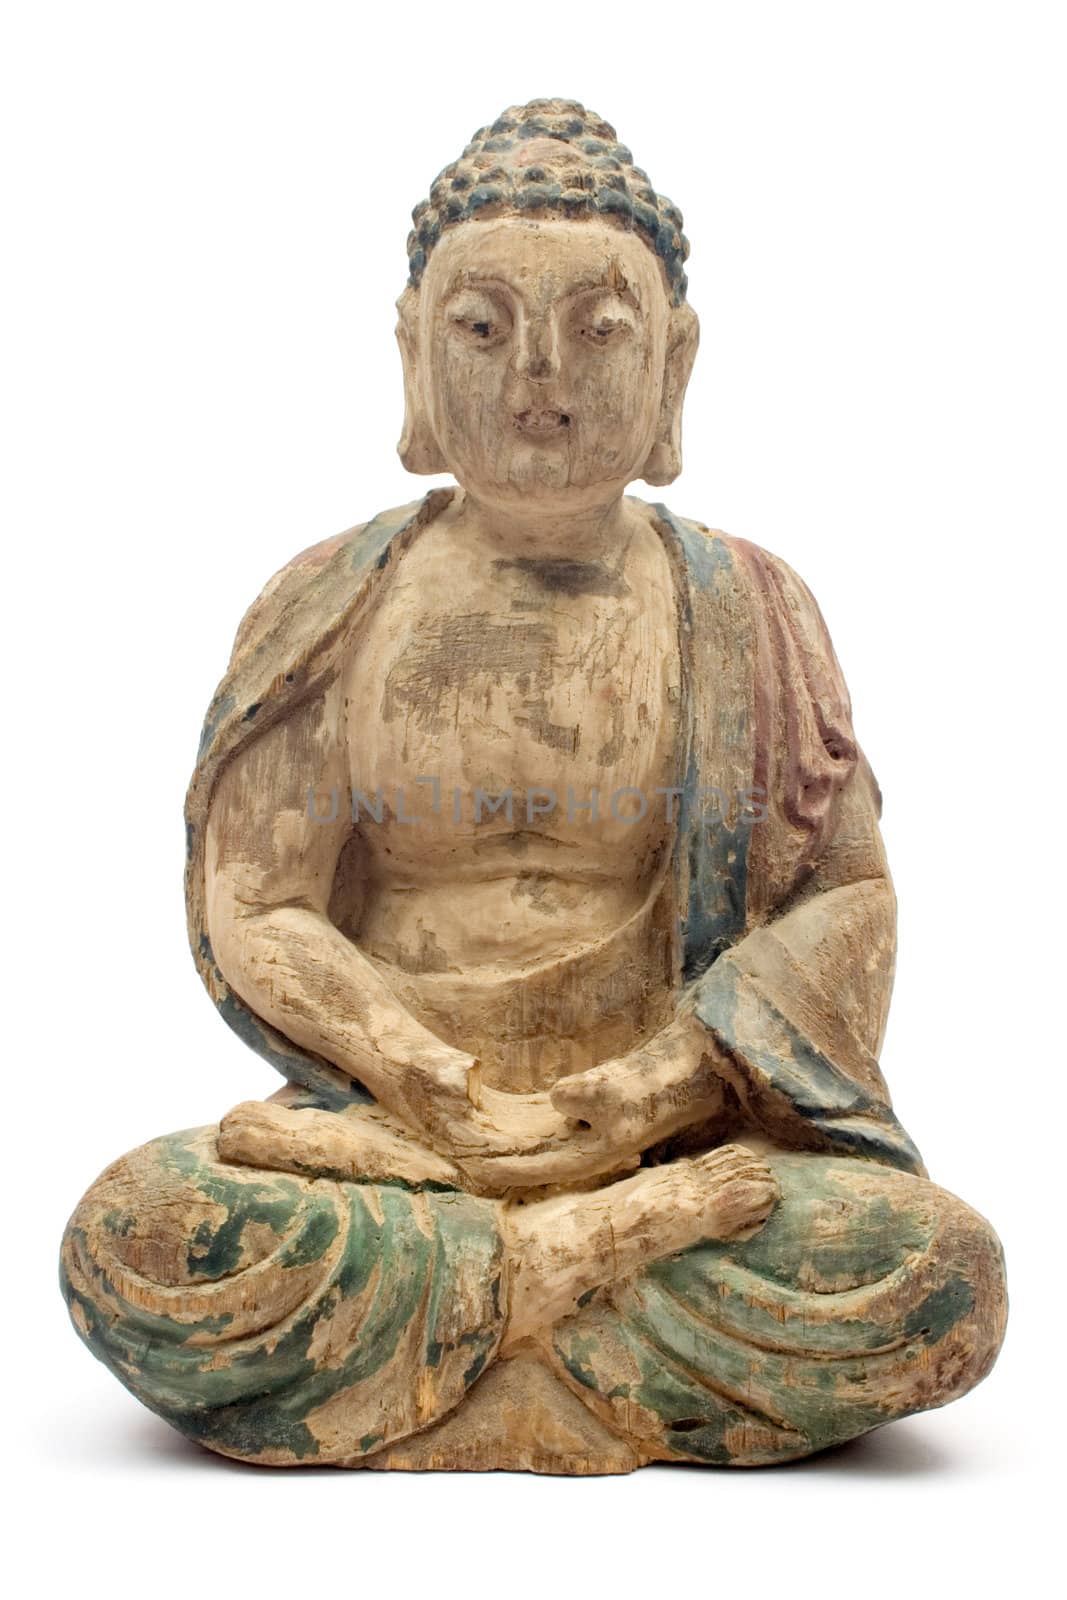 Corroded wooden statue manufactured at the end of the 18th century. Isolated on a white background